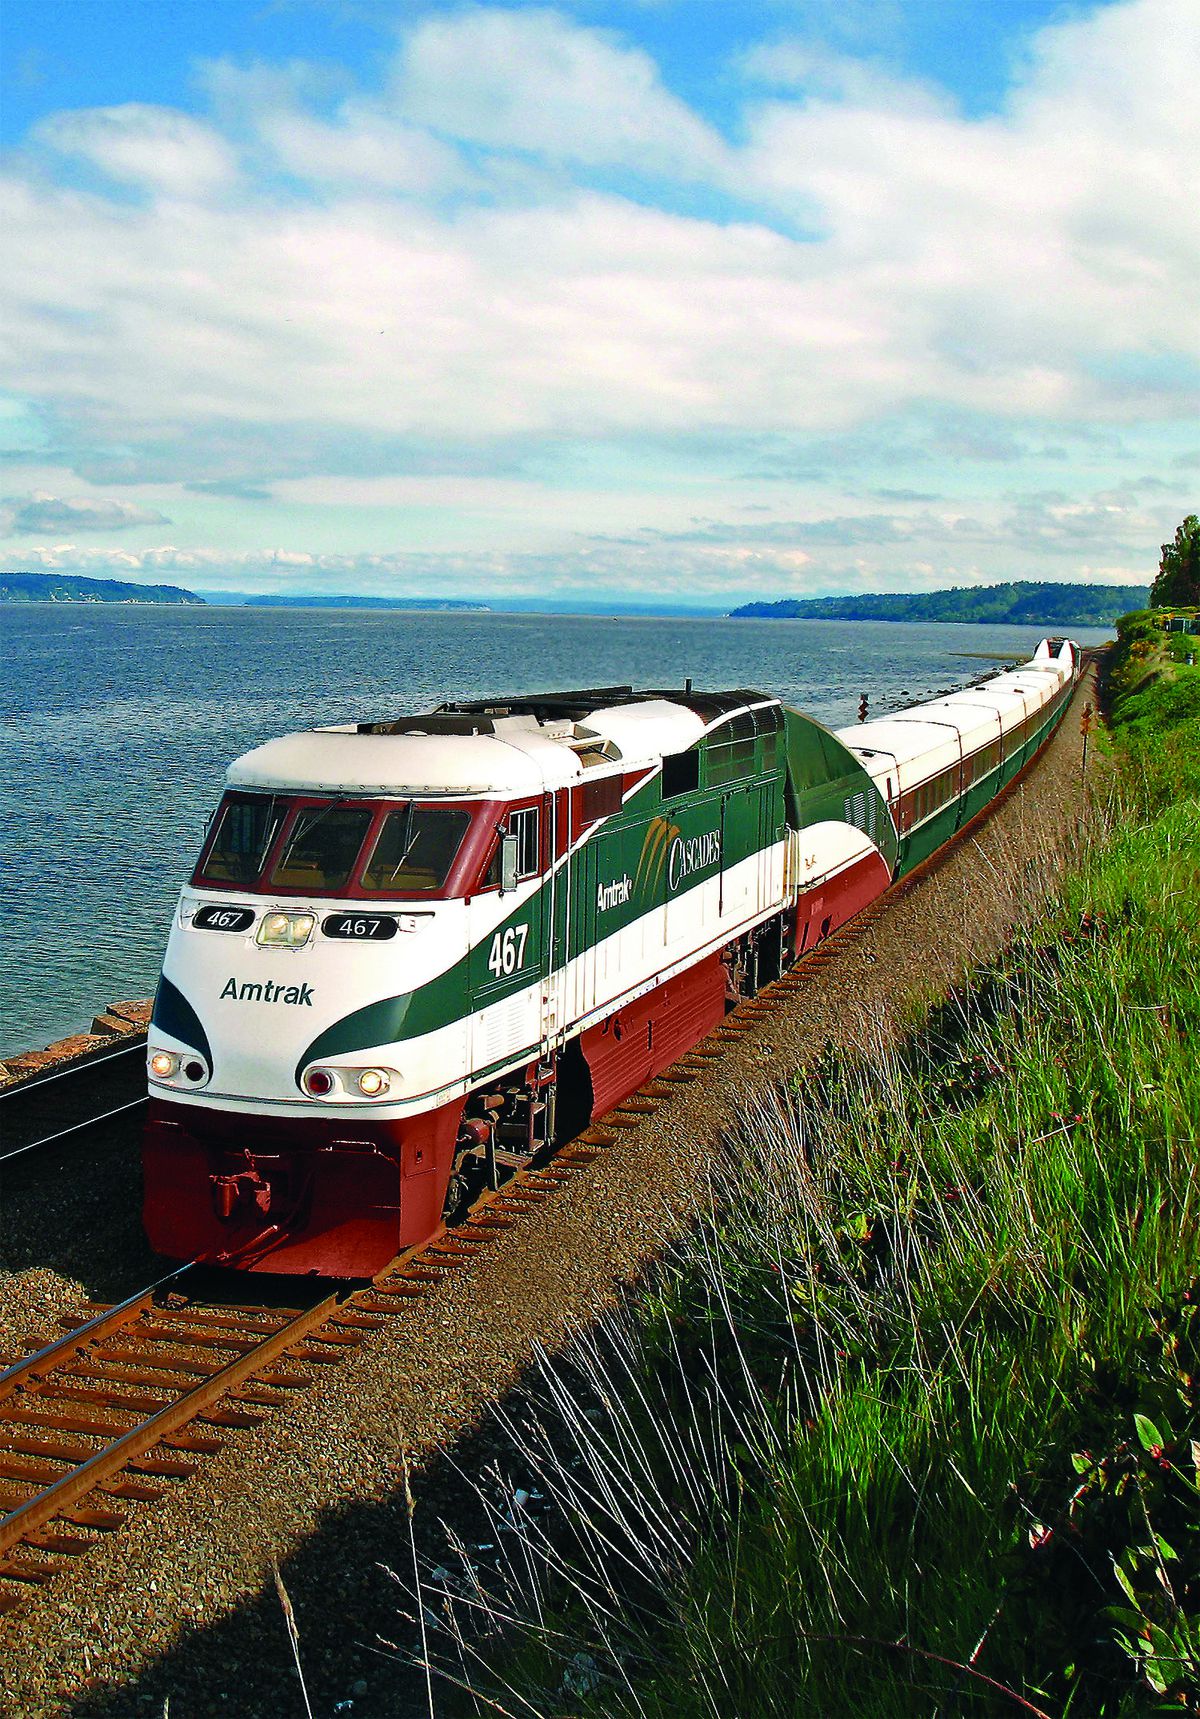 A train rides along a track which is adjacent to a body of water. The train is white, green, and red. There is tall grass on the other side of the track.